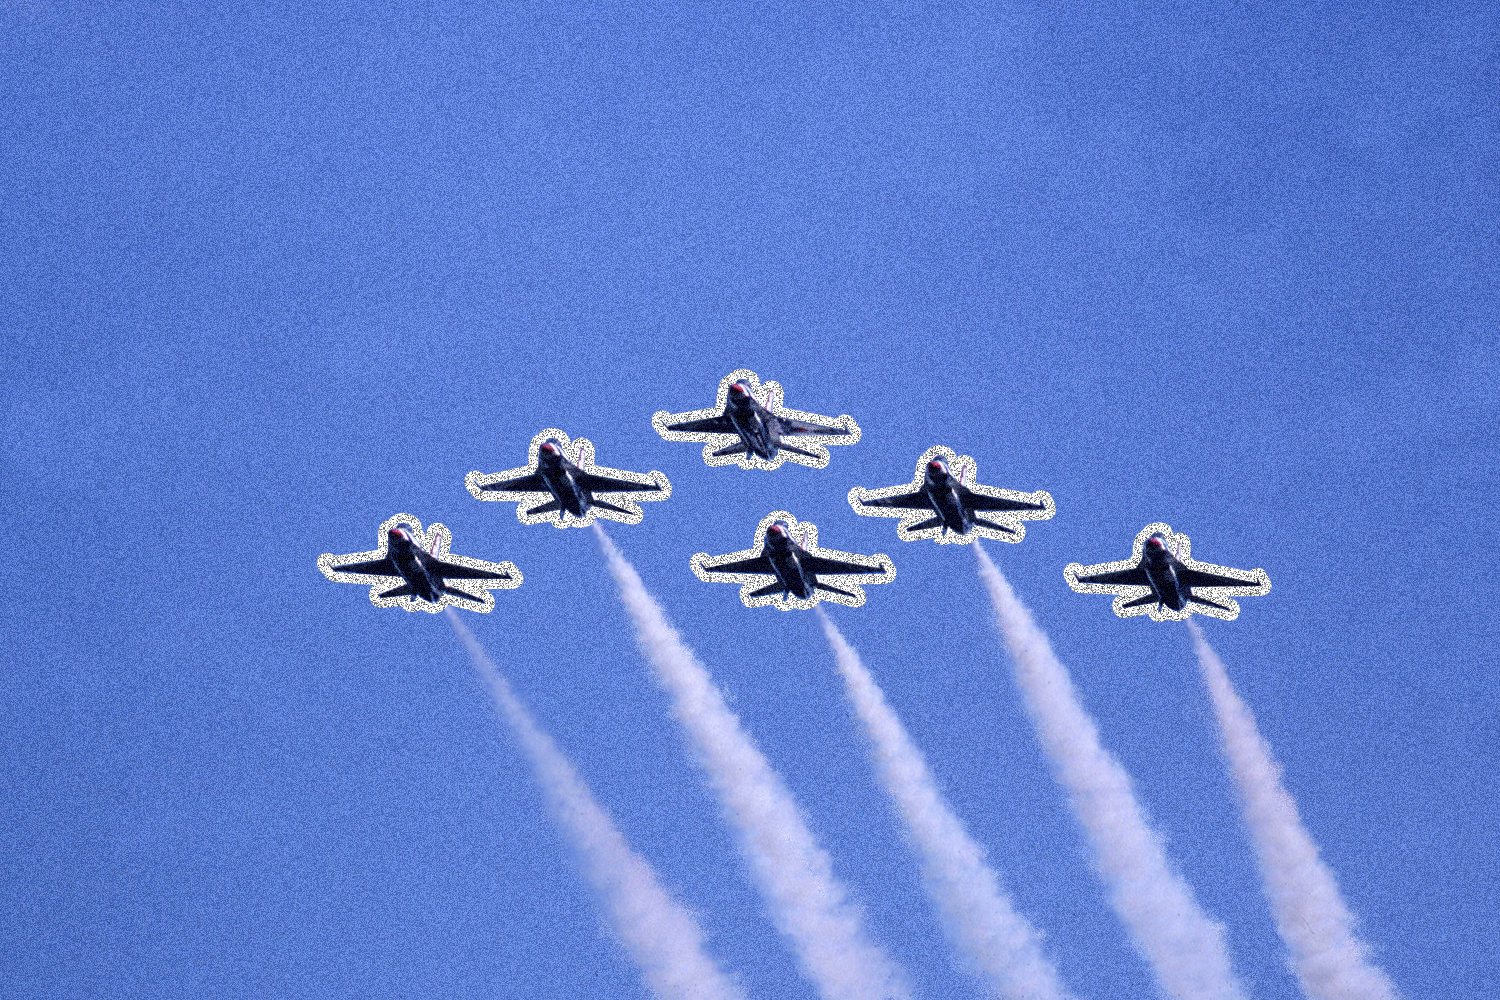 Six fighter jets flying in V-formation across a blue sky